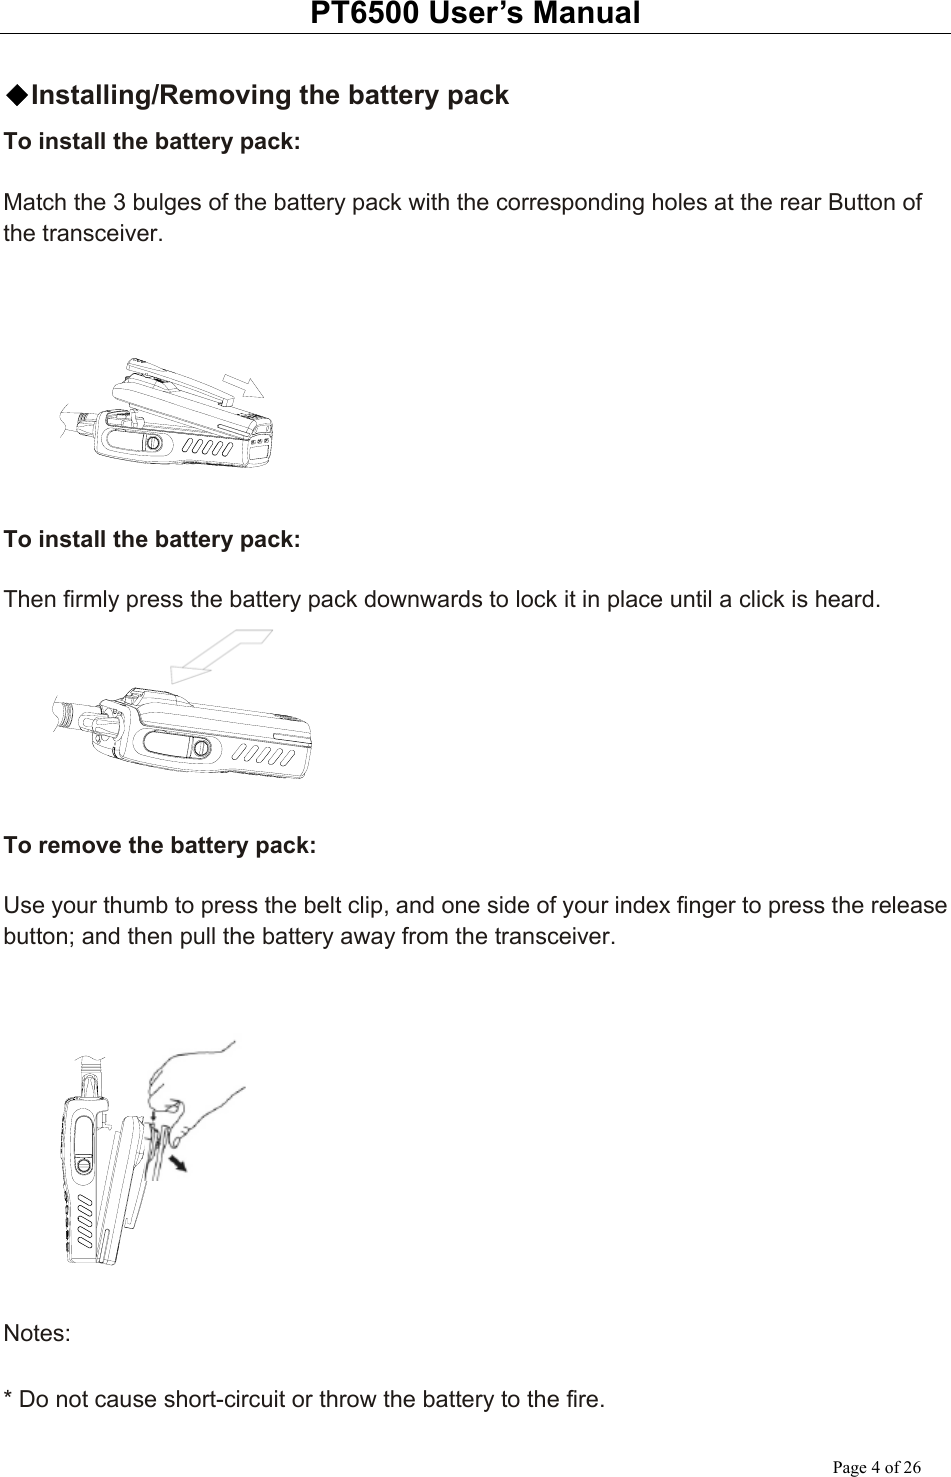 PT6500 User’s Manual Page 4 of 26  ◆Installing/Removing the battery pack To install the battery pack:  Match the 3 bulges of the battery pack with the corresponding holes at the rear Button of the transceiver.        To install the battery pack:  Then firmly press the battery pack downwards to lock it in place until a click is heard.       To remove the battery pack:  Use your thumb to press the belt clip, and one side of your index finger to press the release button; and then pull the battery away from the transceiver.      Notes:  * Do not cause short-circuit or throw the battery to the fire. 